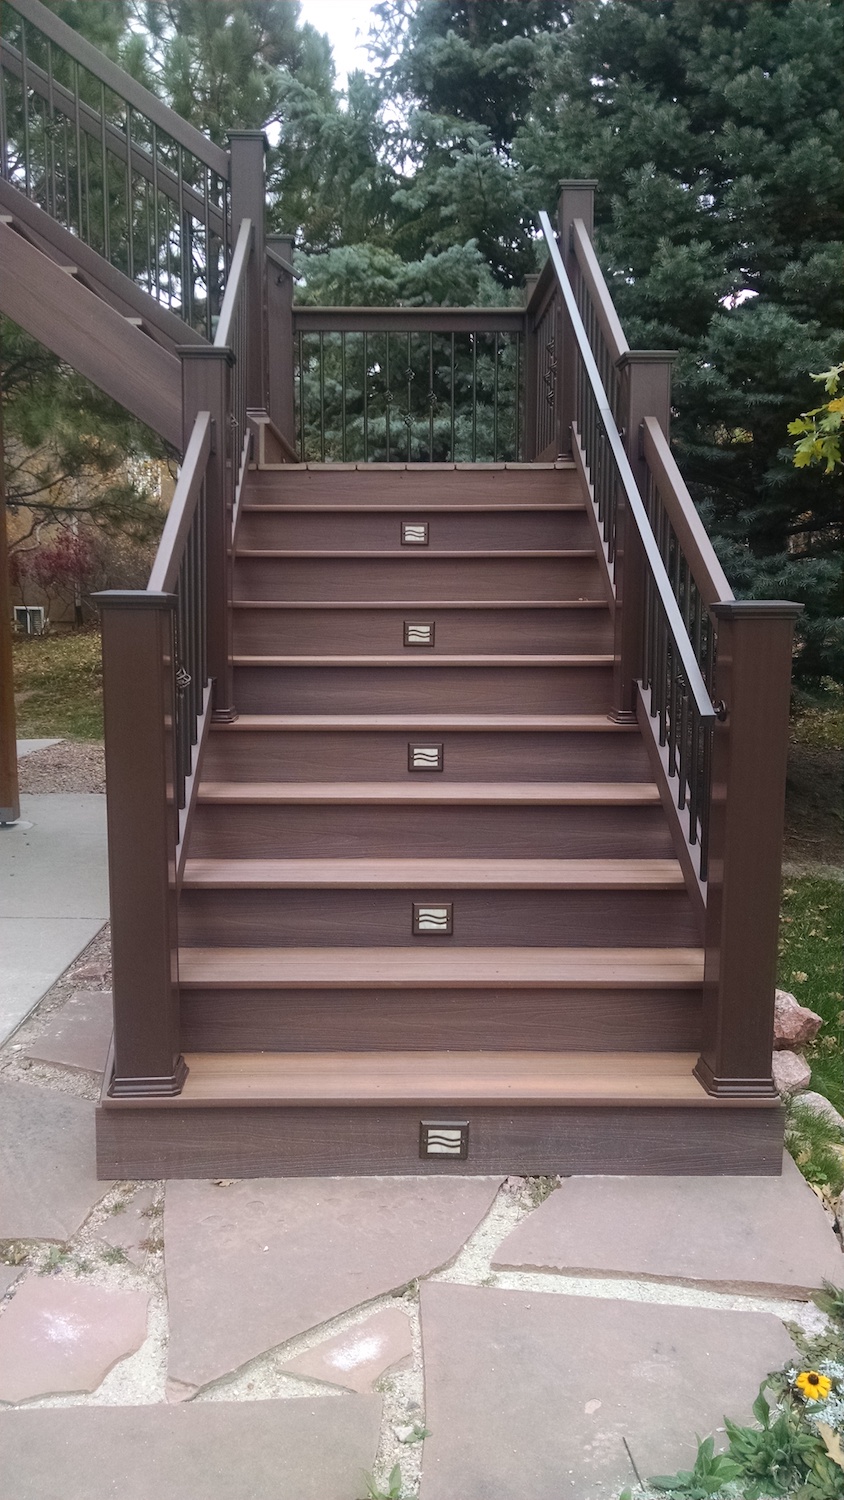 Closed deck stairs that have step lights on alternating stairs.